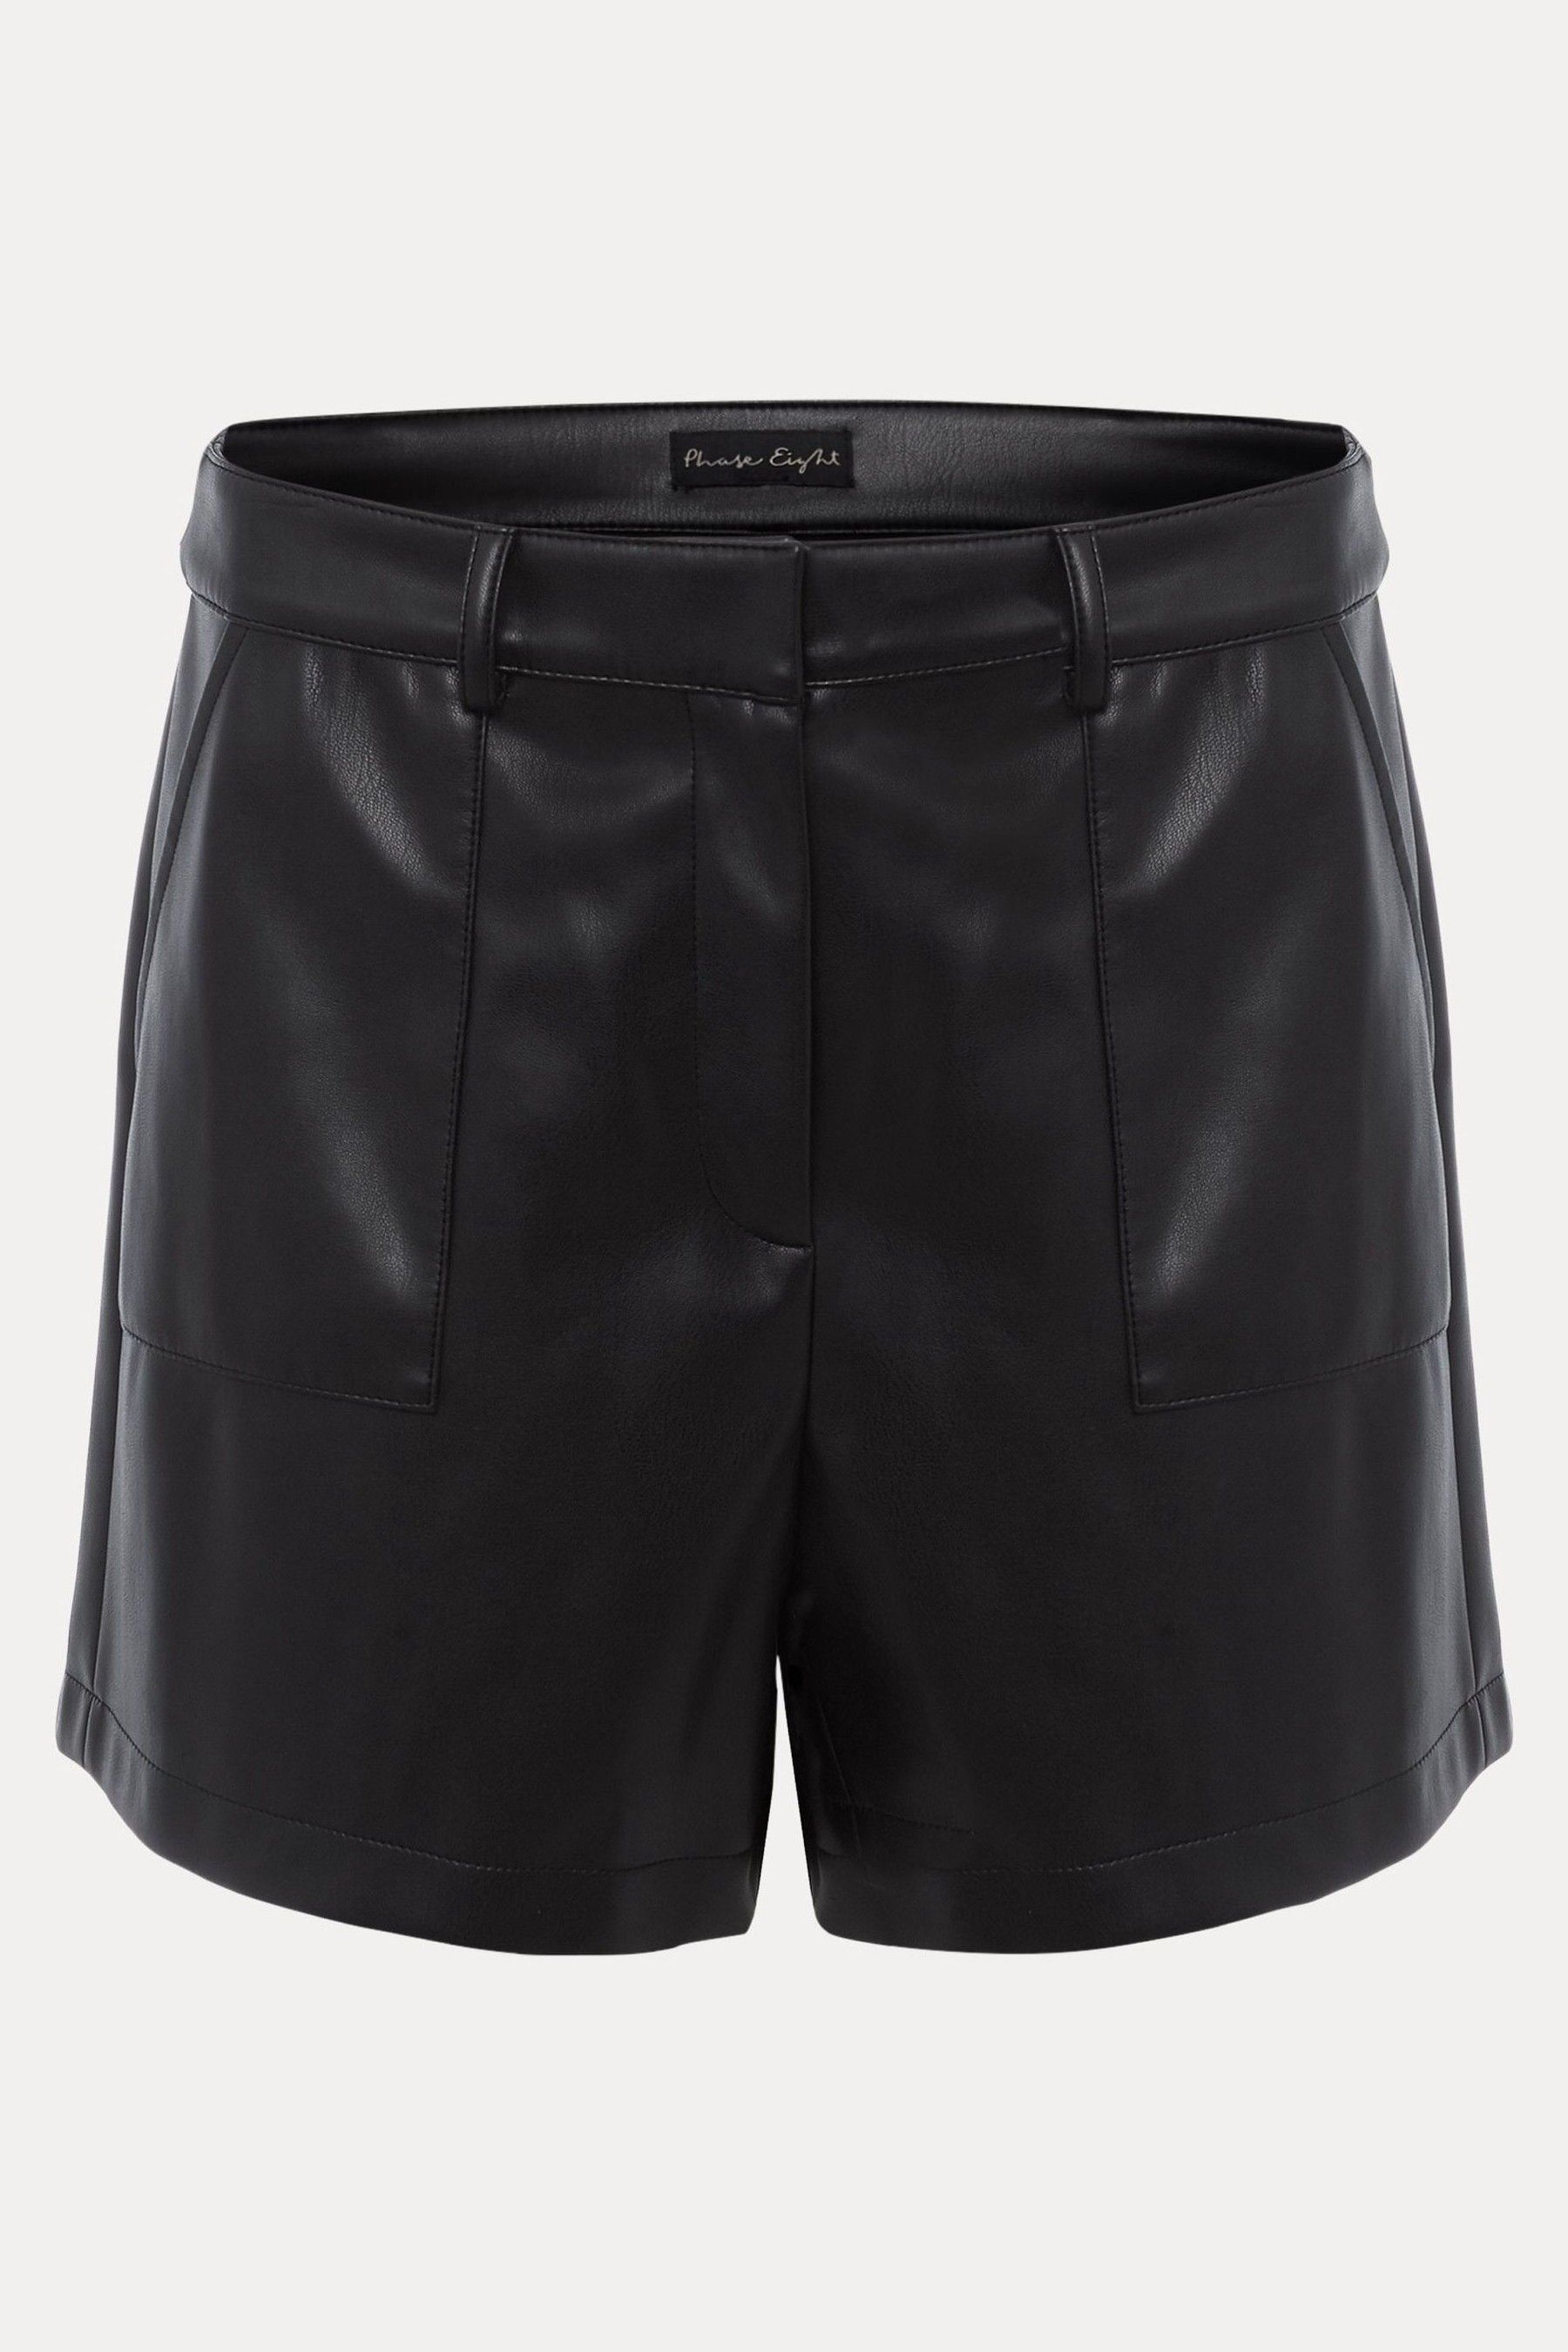 Buy Phase Eight Black Pleather Hadley Shorts from the Next UK online shop